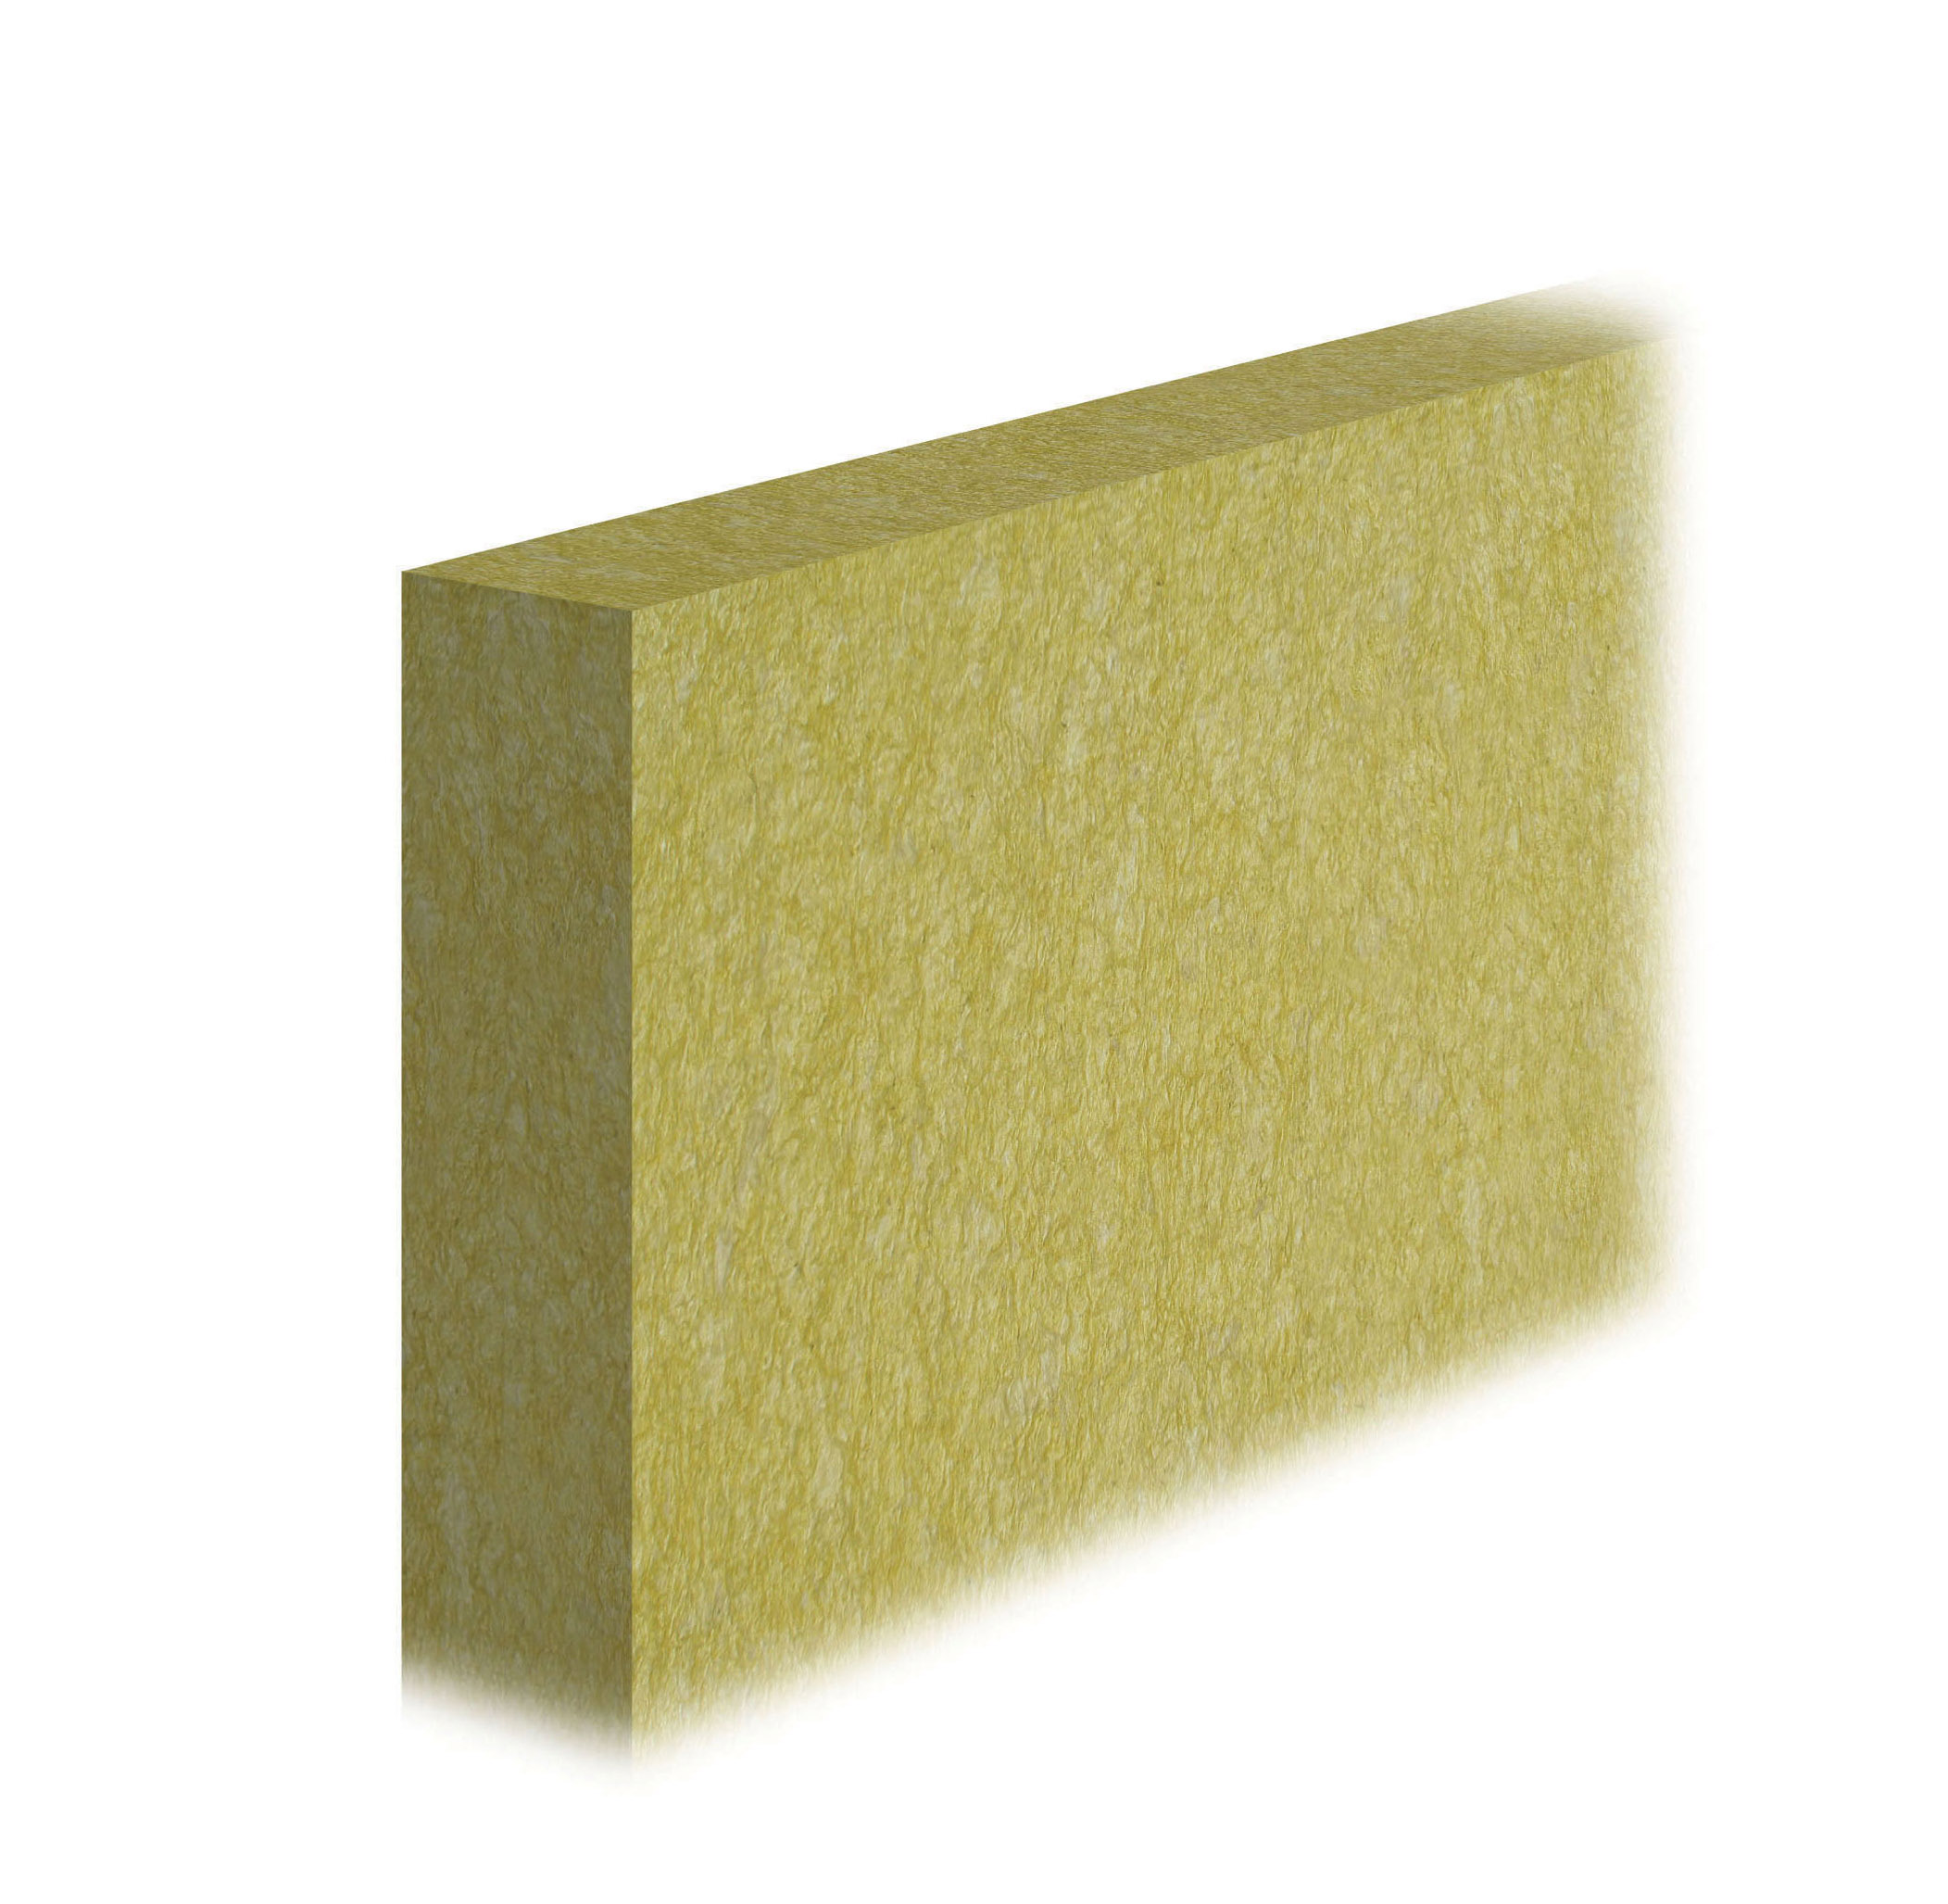 EWI MONODENSITY SLAB: Mono density Rock Mineral Wool slab for low-thickness applications in External Wall Insulation systems